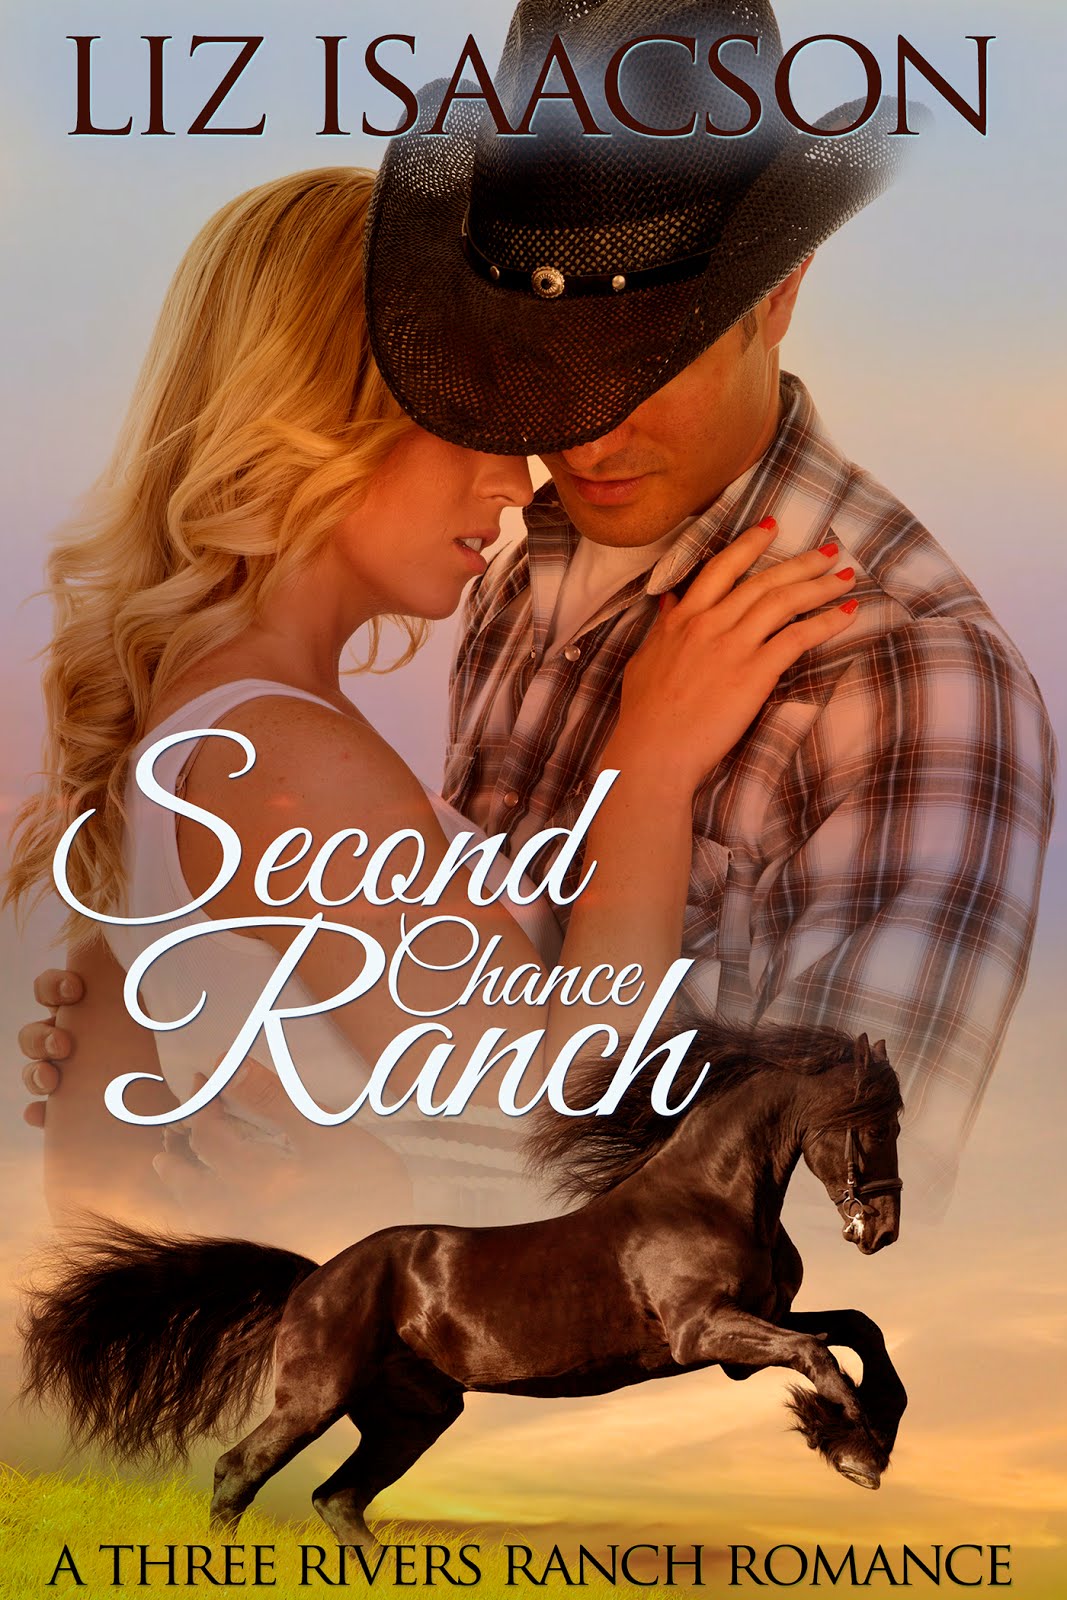 Buy SECOND CHANCE RANCH